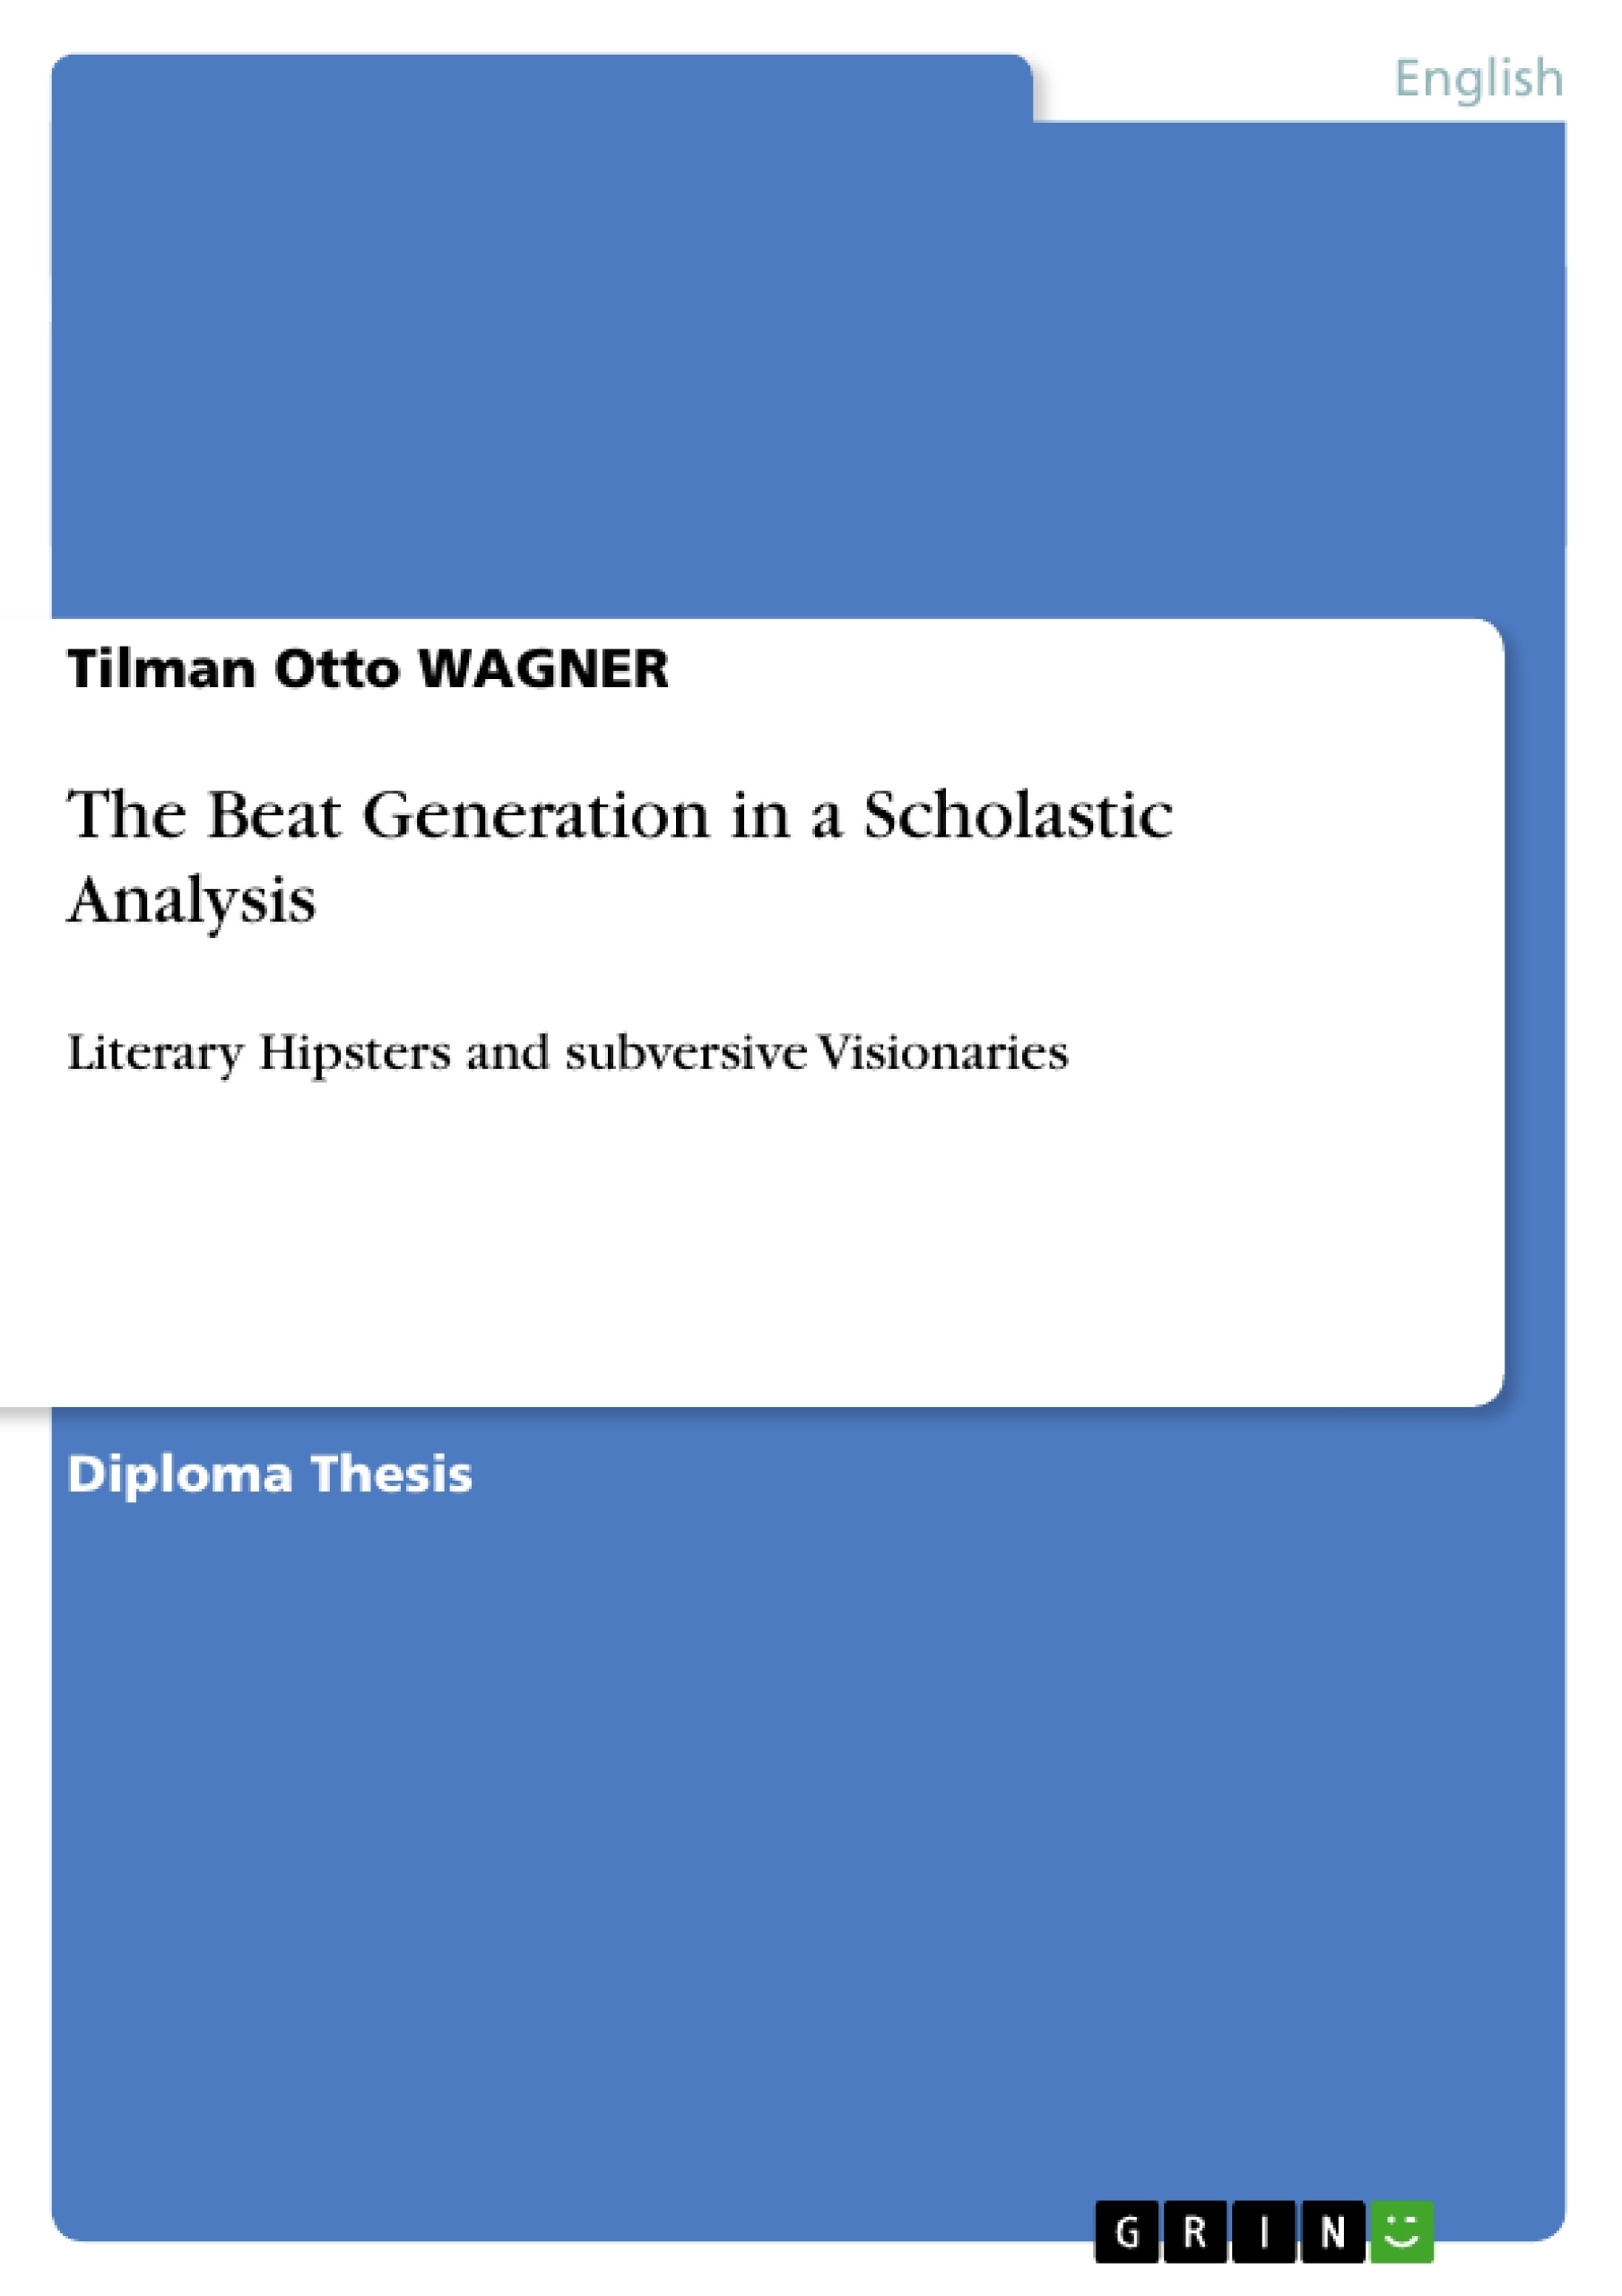 Título: The Beat Generation in a Scholastic Analysis